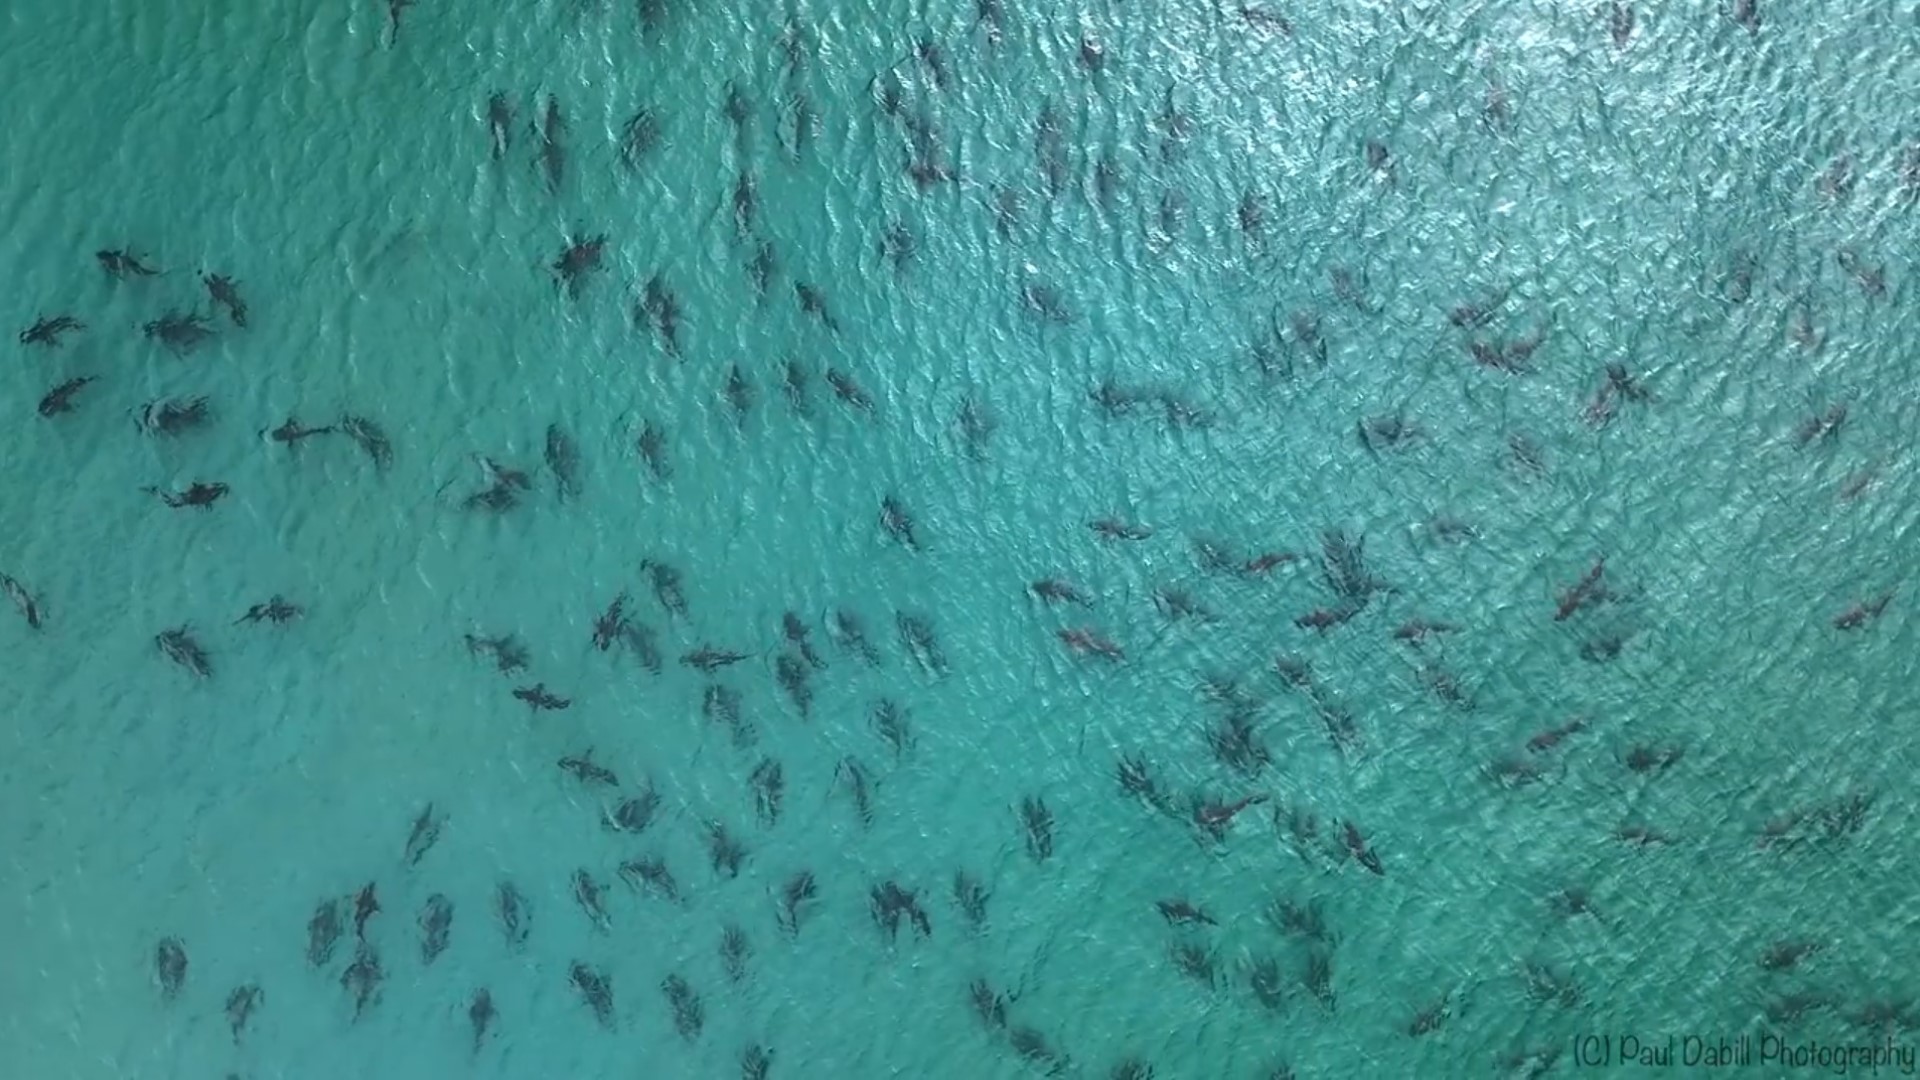 Paul Dabill Photography captured drone video of blacktip sharks swimming near Singer Island on March 4, 2021.